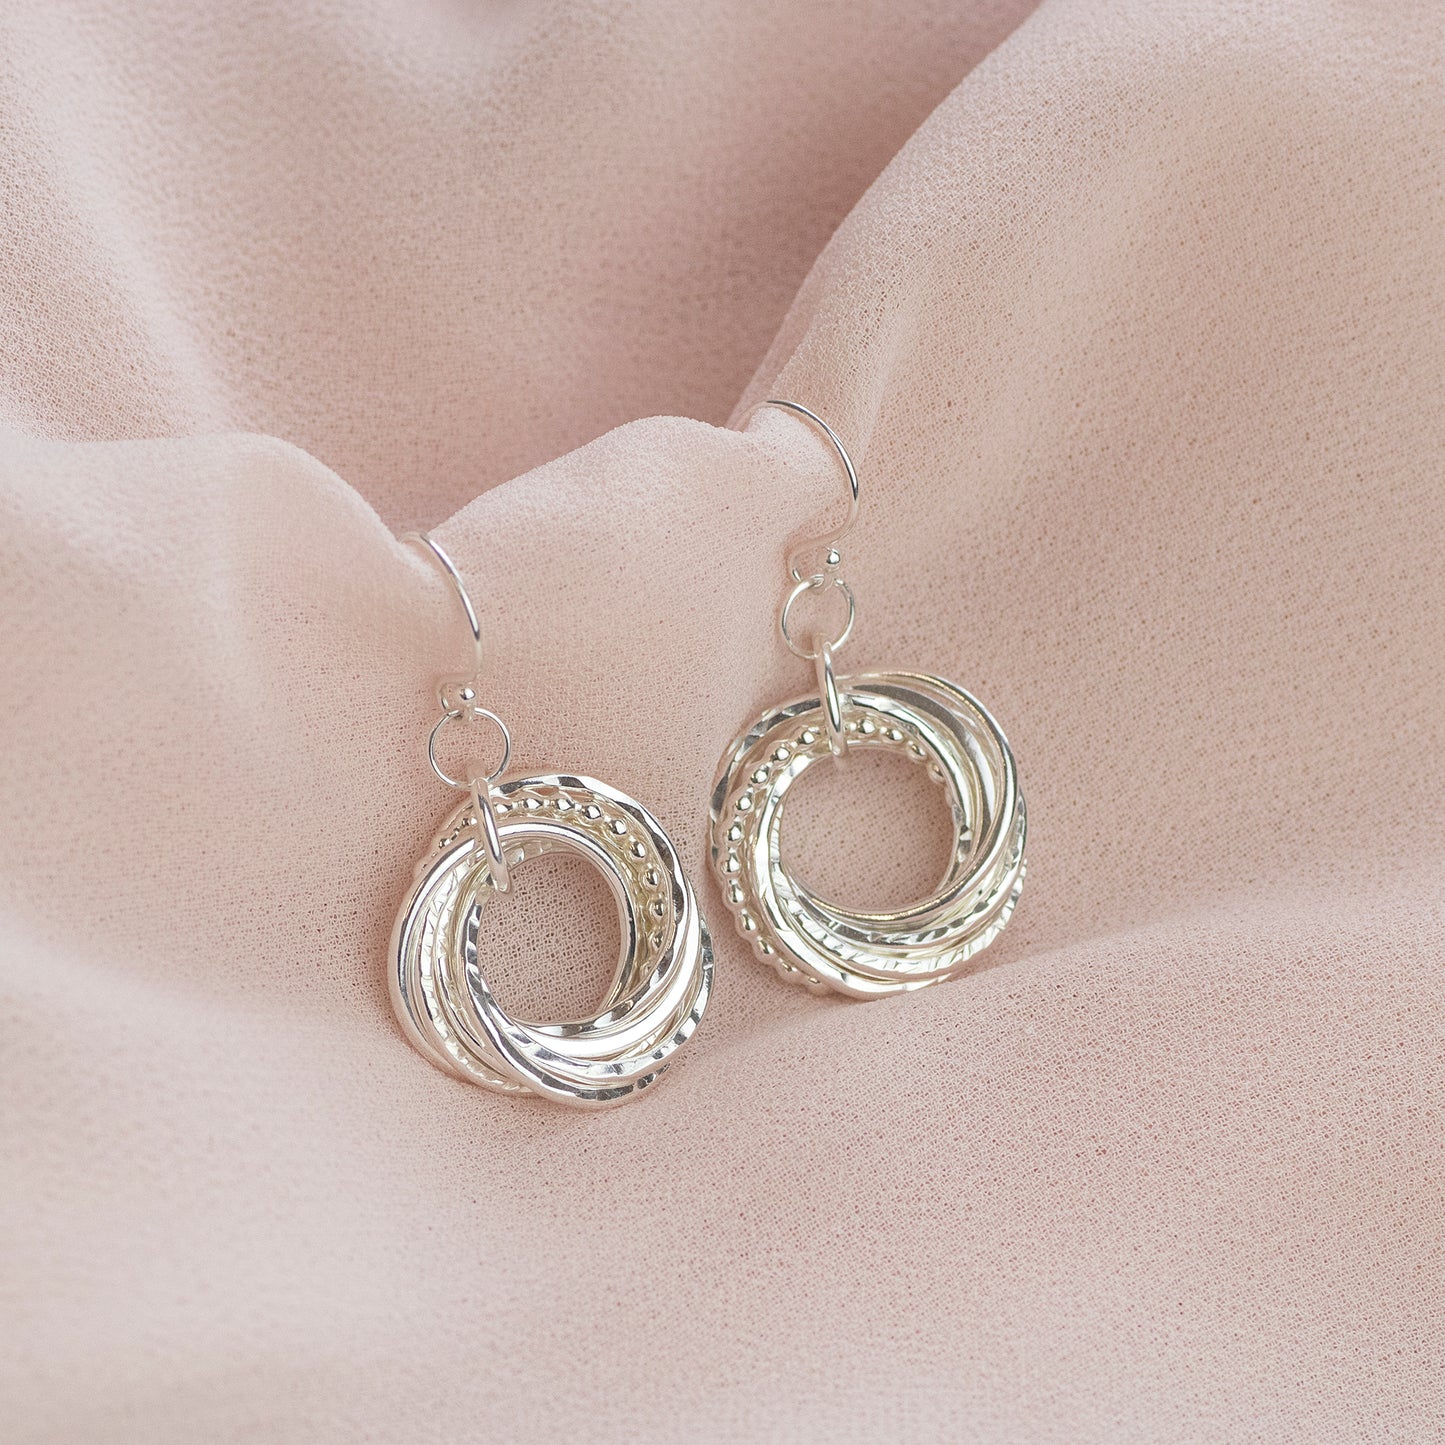 80th Birthday Earrings - 8 Links for 8 Decades - Silver